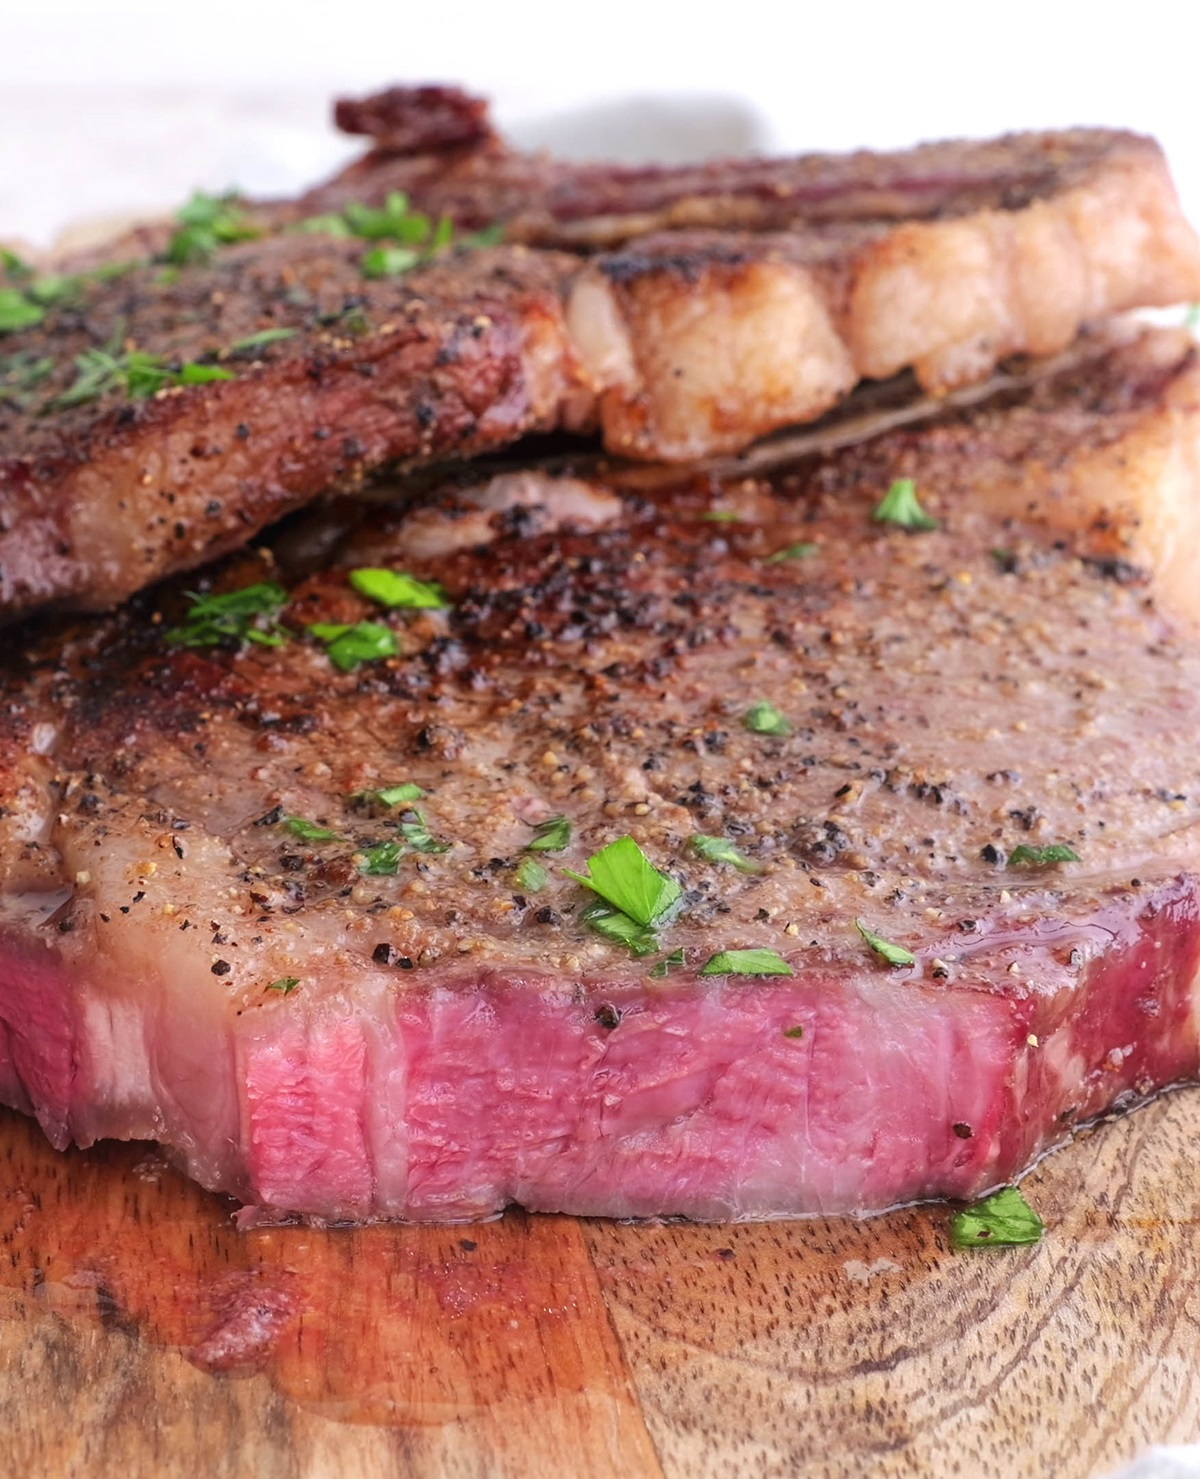 Seared ribeye steak, cut into and ready to eat.